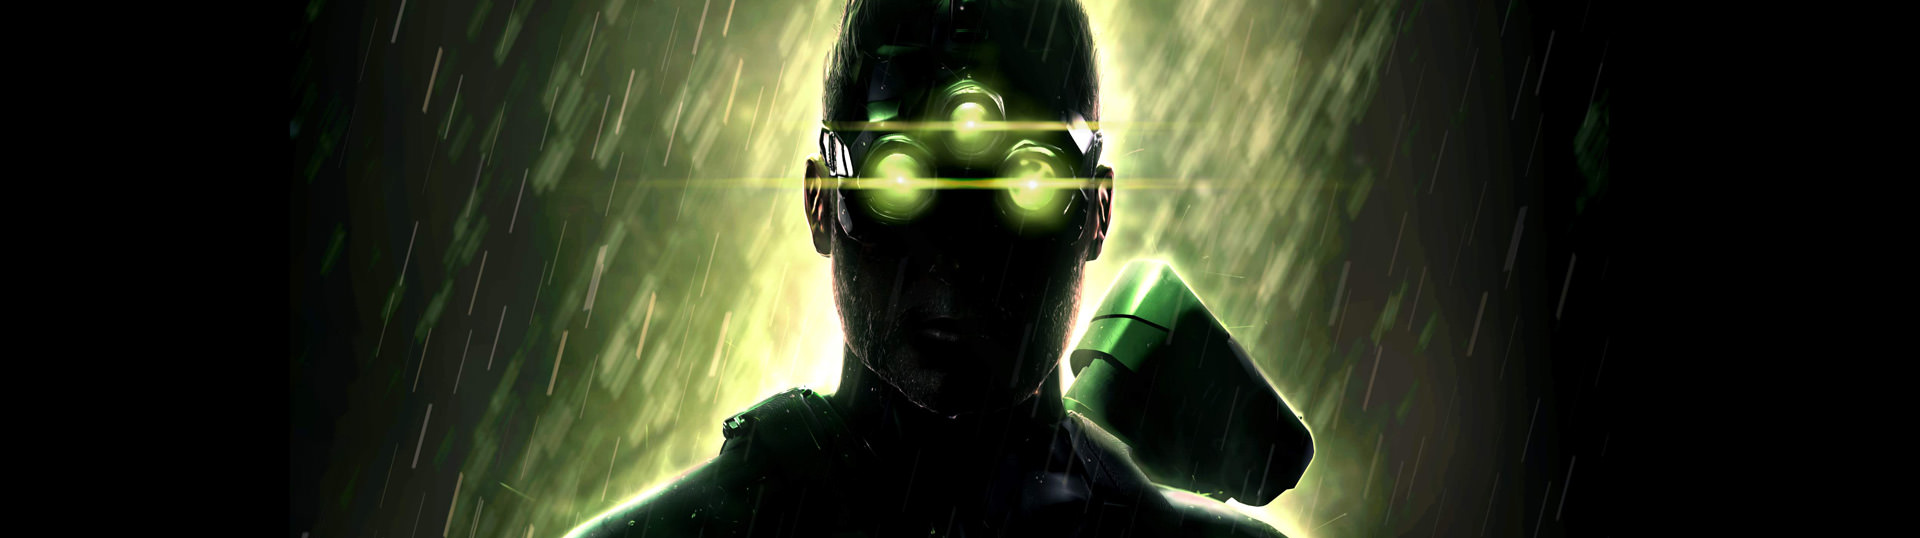 Buy Tom Clancy's Splinter Cell Chaos Theory® from the Humble Store and save  75%